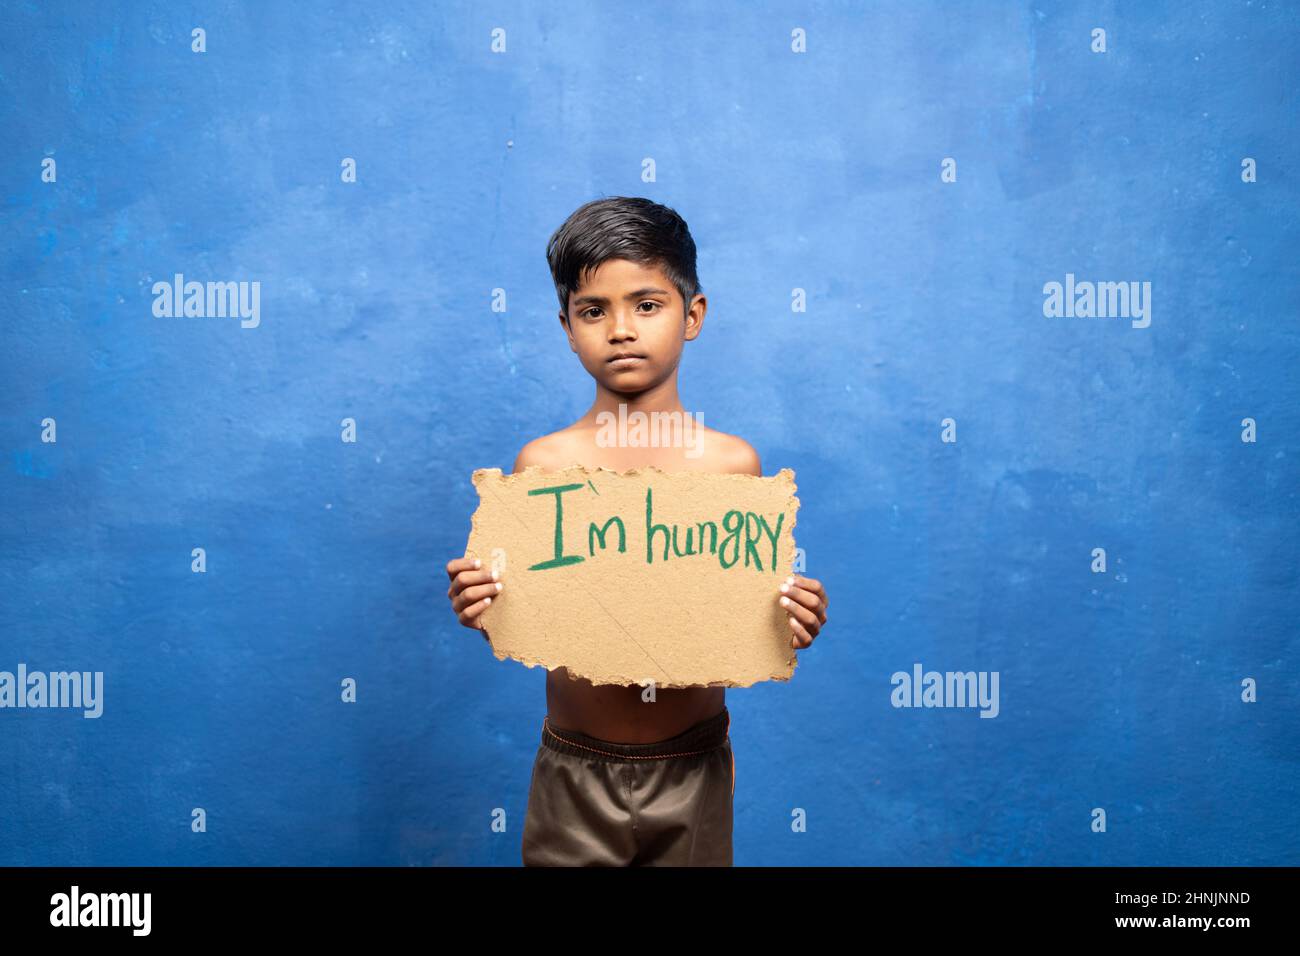 Sad Indian poor kid holding I am hungry sign board by looking at camera on blu background with copy space - concept of poverty and malnutrition. Stock Photo